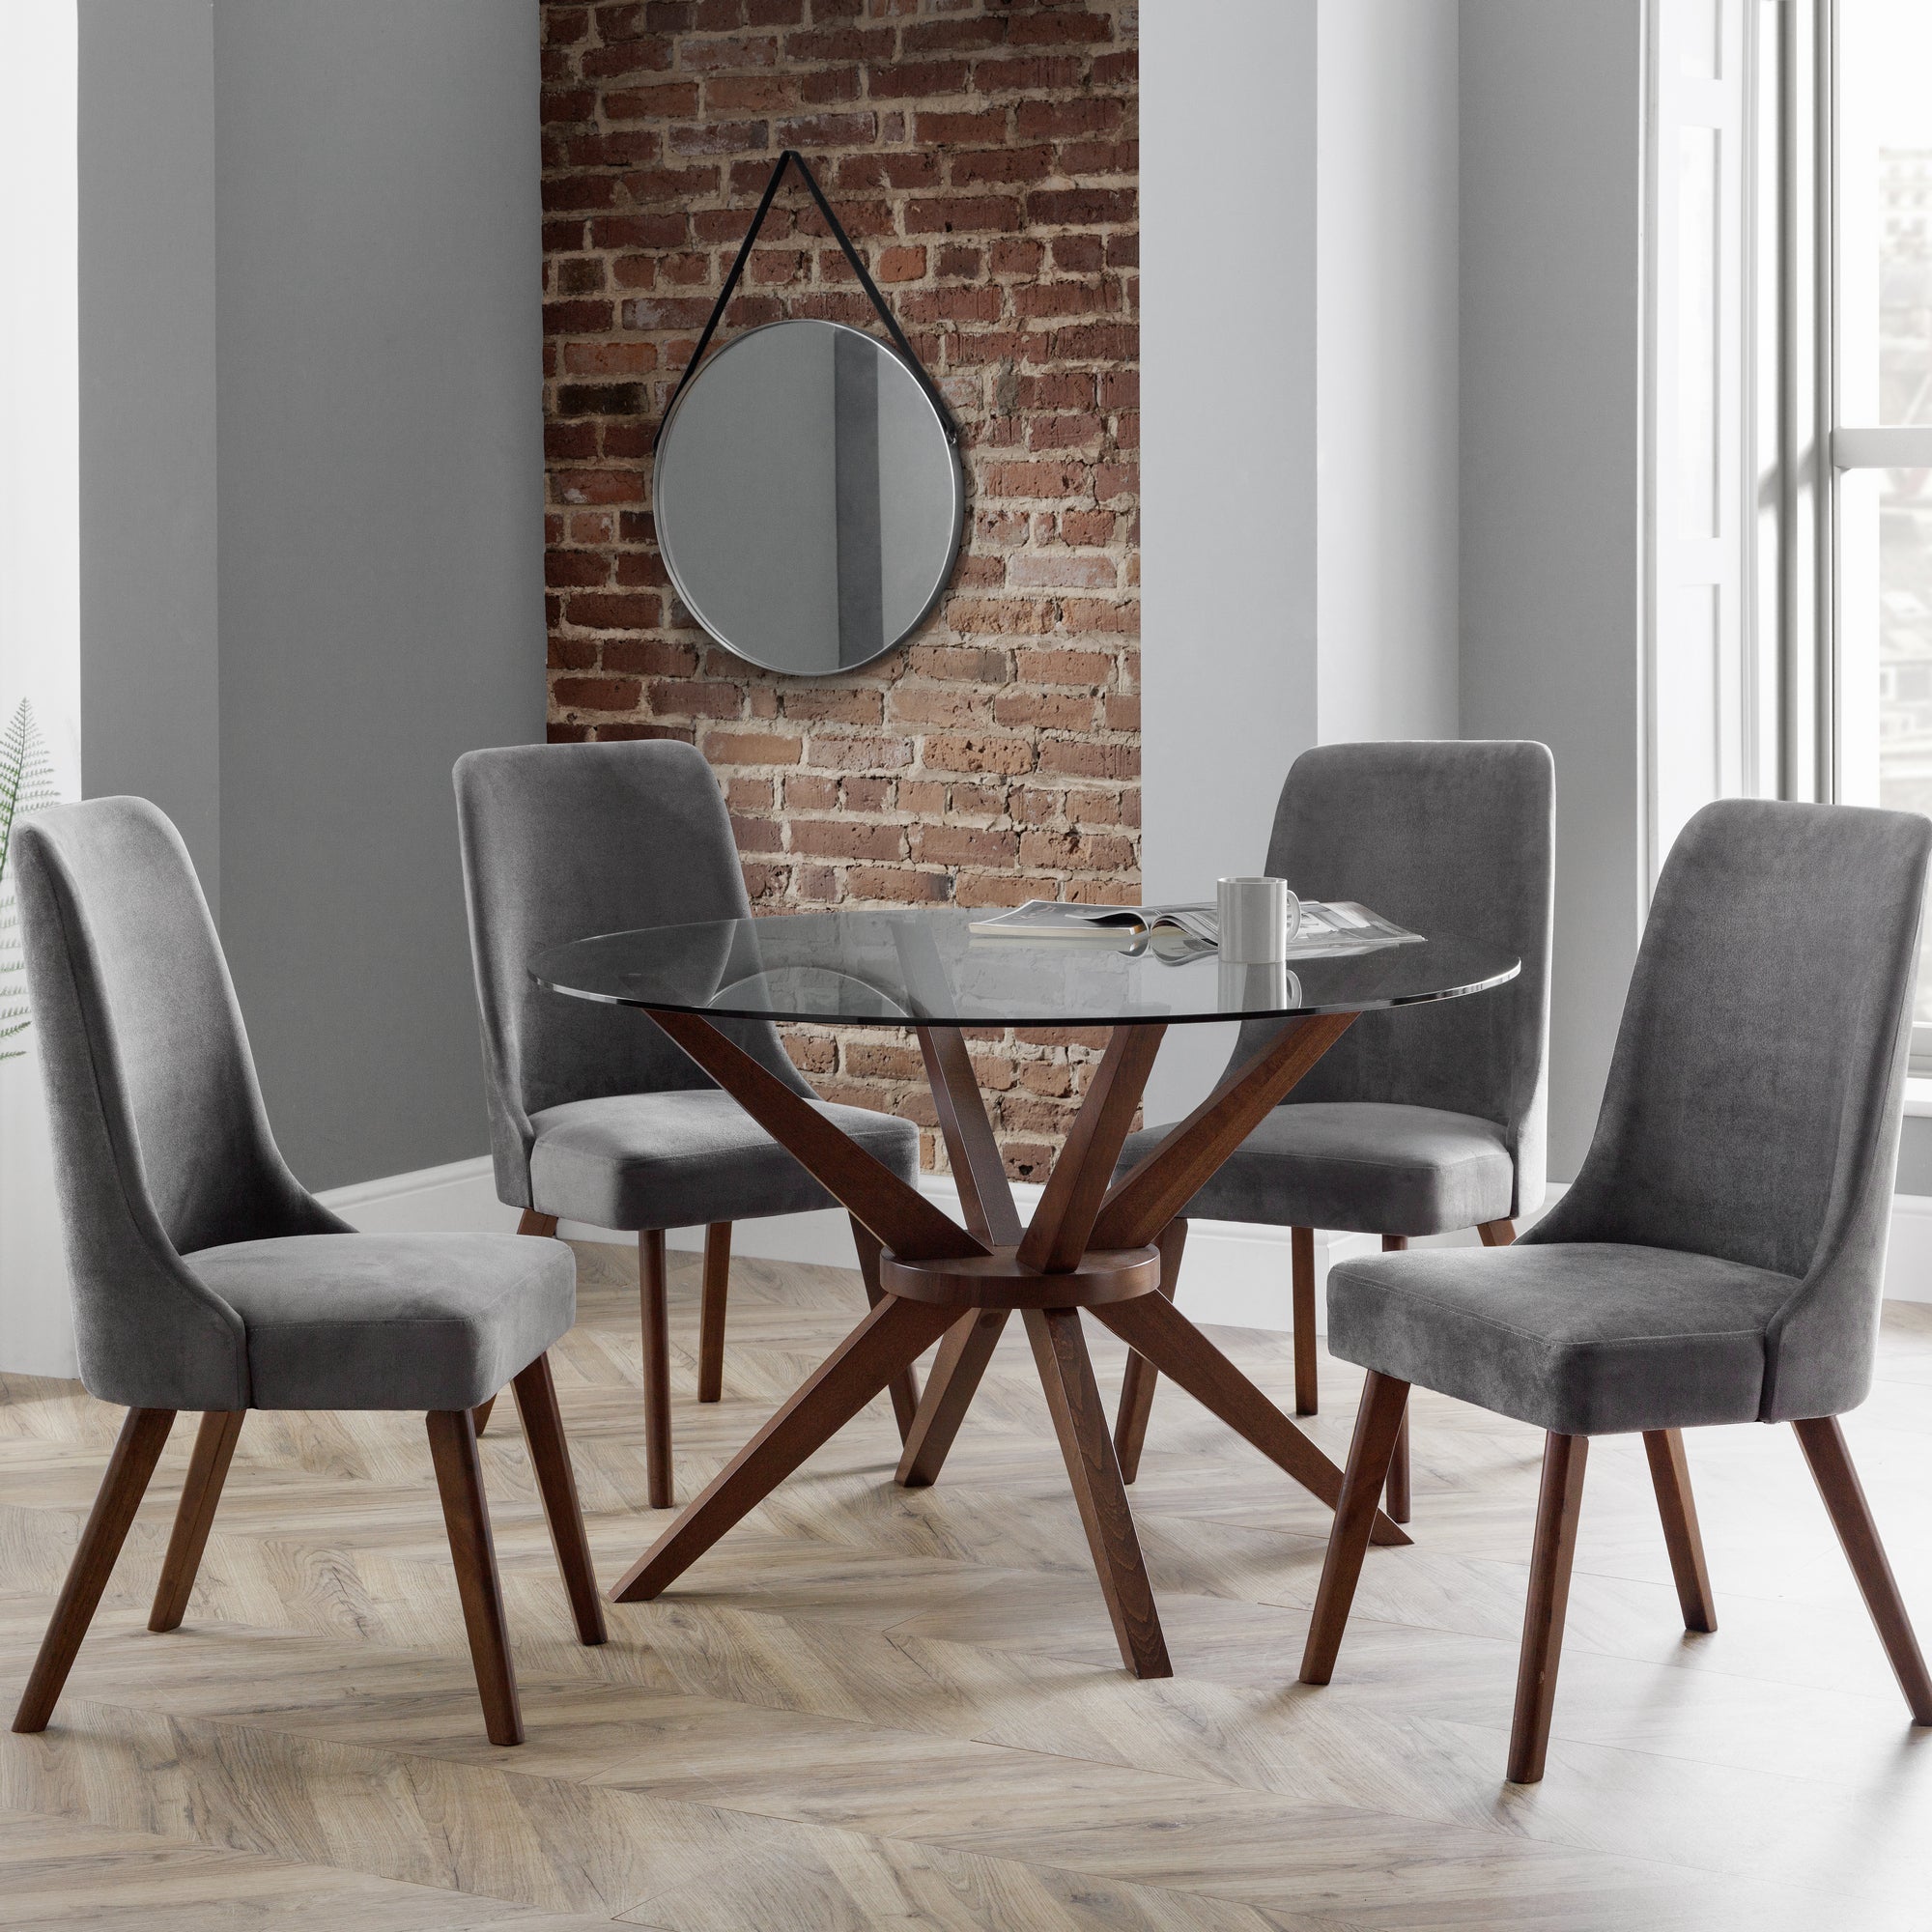 Chelsea Round Glass Top Dining Table with 4 Huxley Chairs Brown